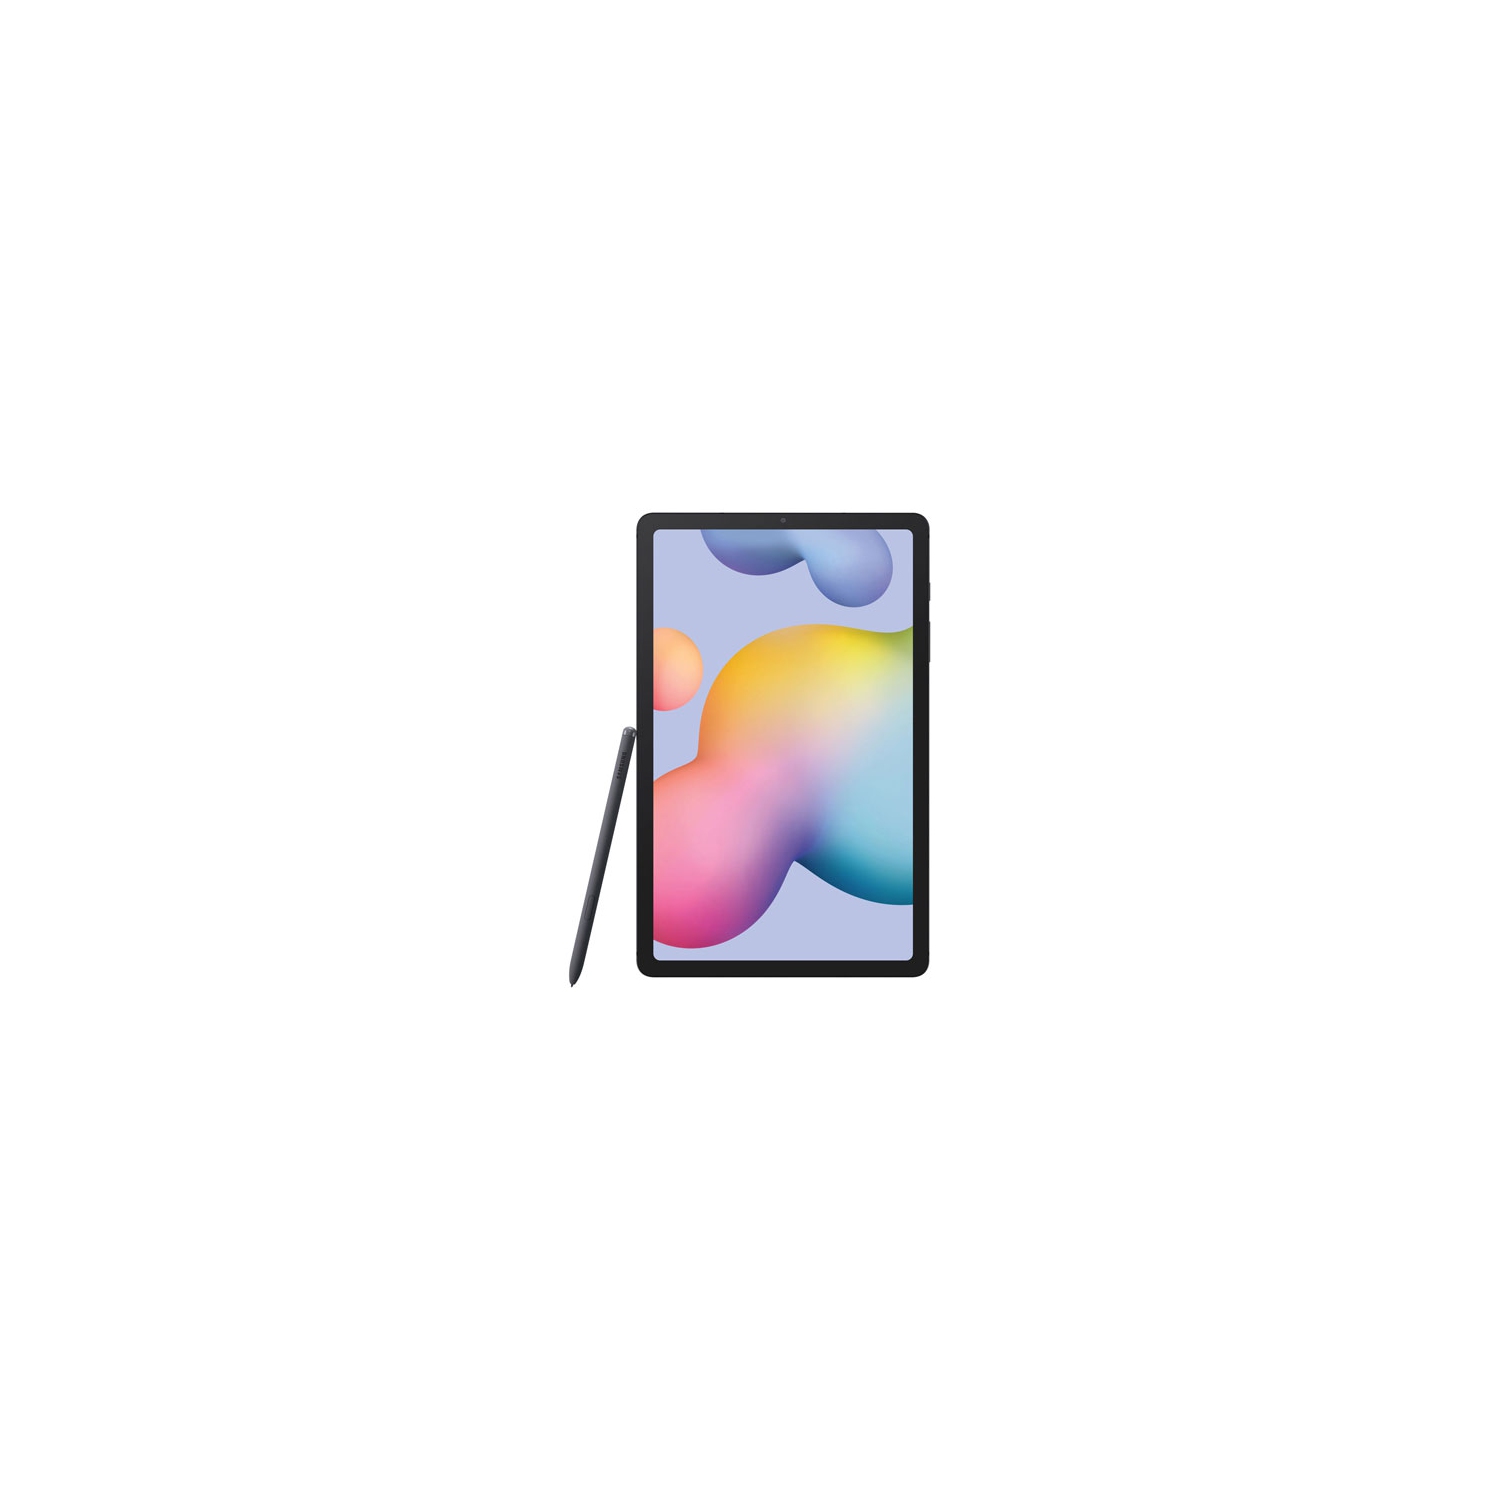 Open Box - Samsung Galaxy Tab S6 Lite 10.4" 128GB Android 12 Tablet with Snapdragon 720G 8-Core Processor - Grey